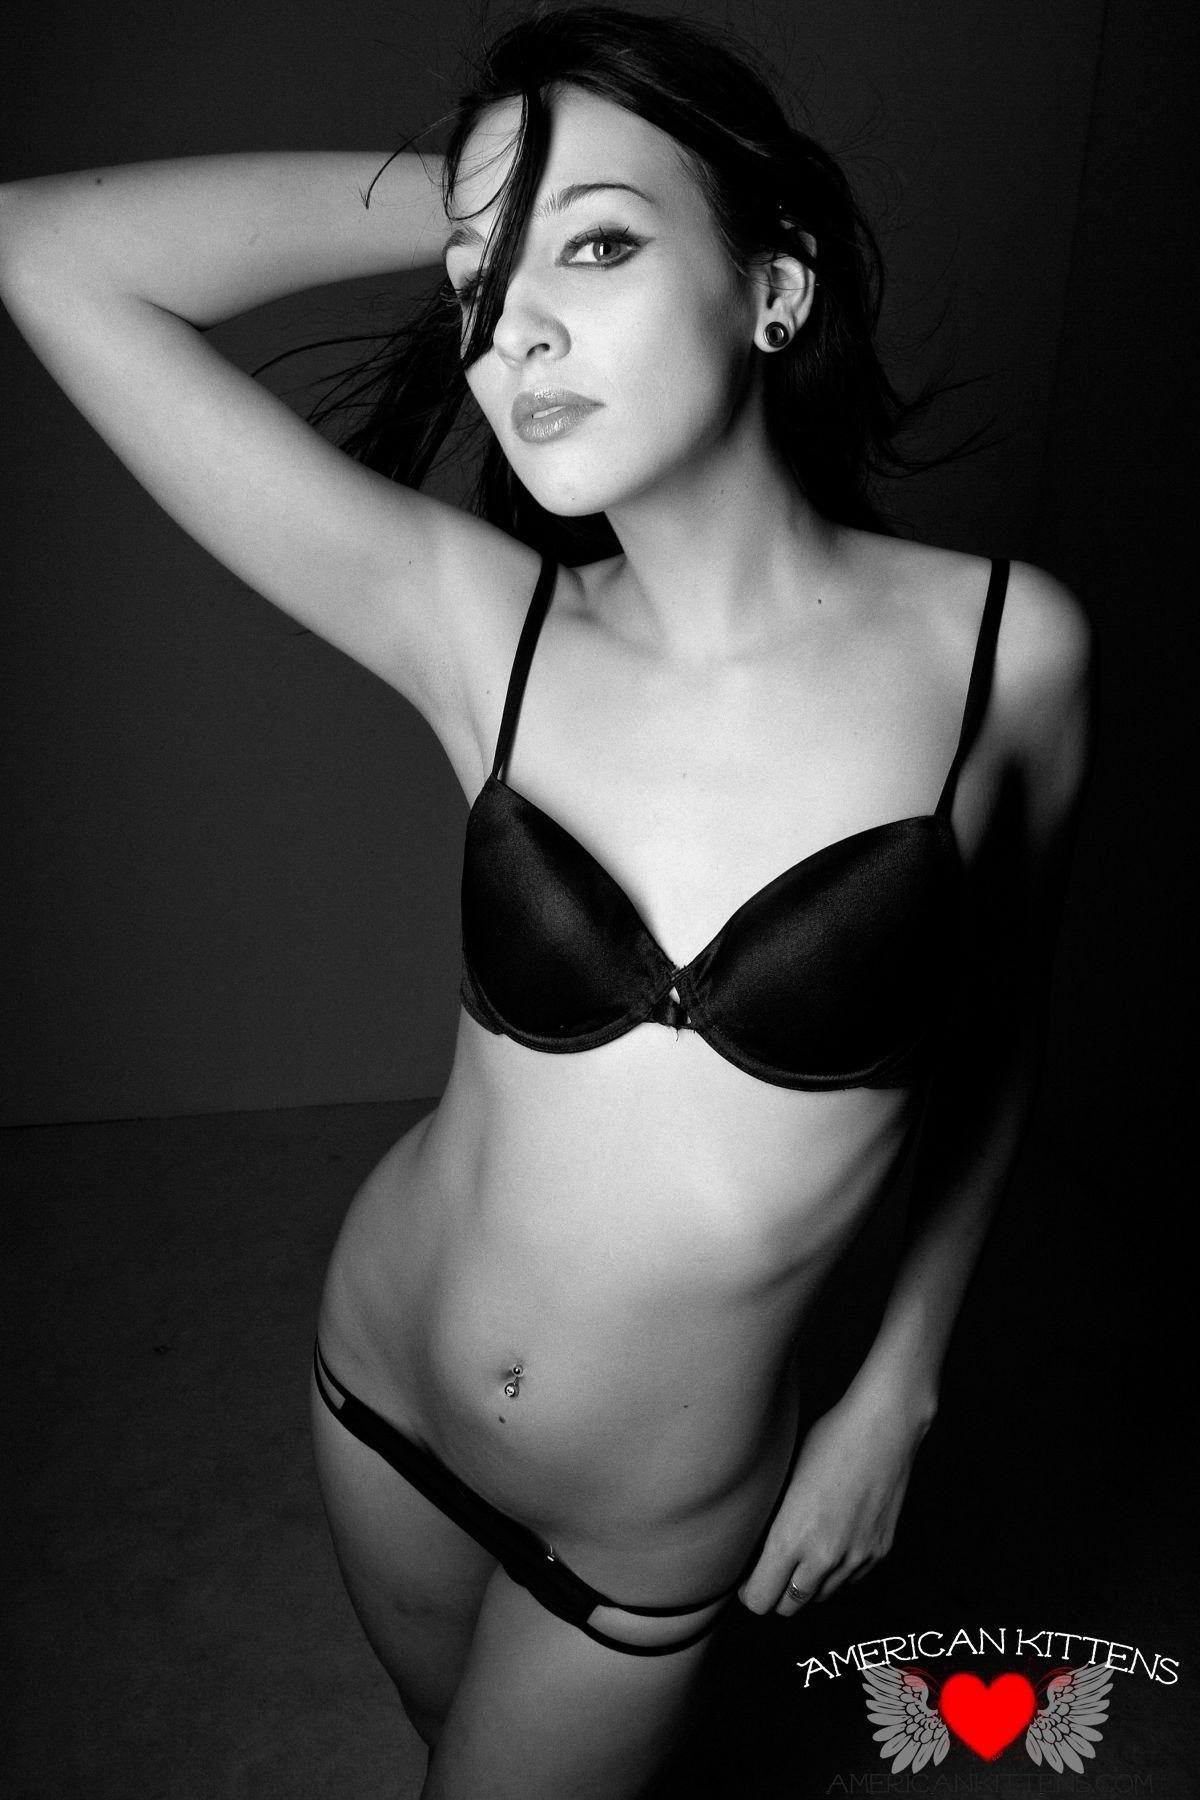 Pictures Of Teen Model Reanna Mae Showing Her Hot Body In Black And White